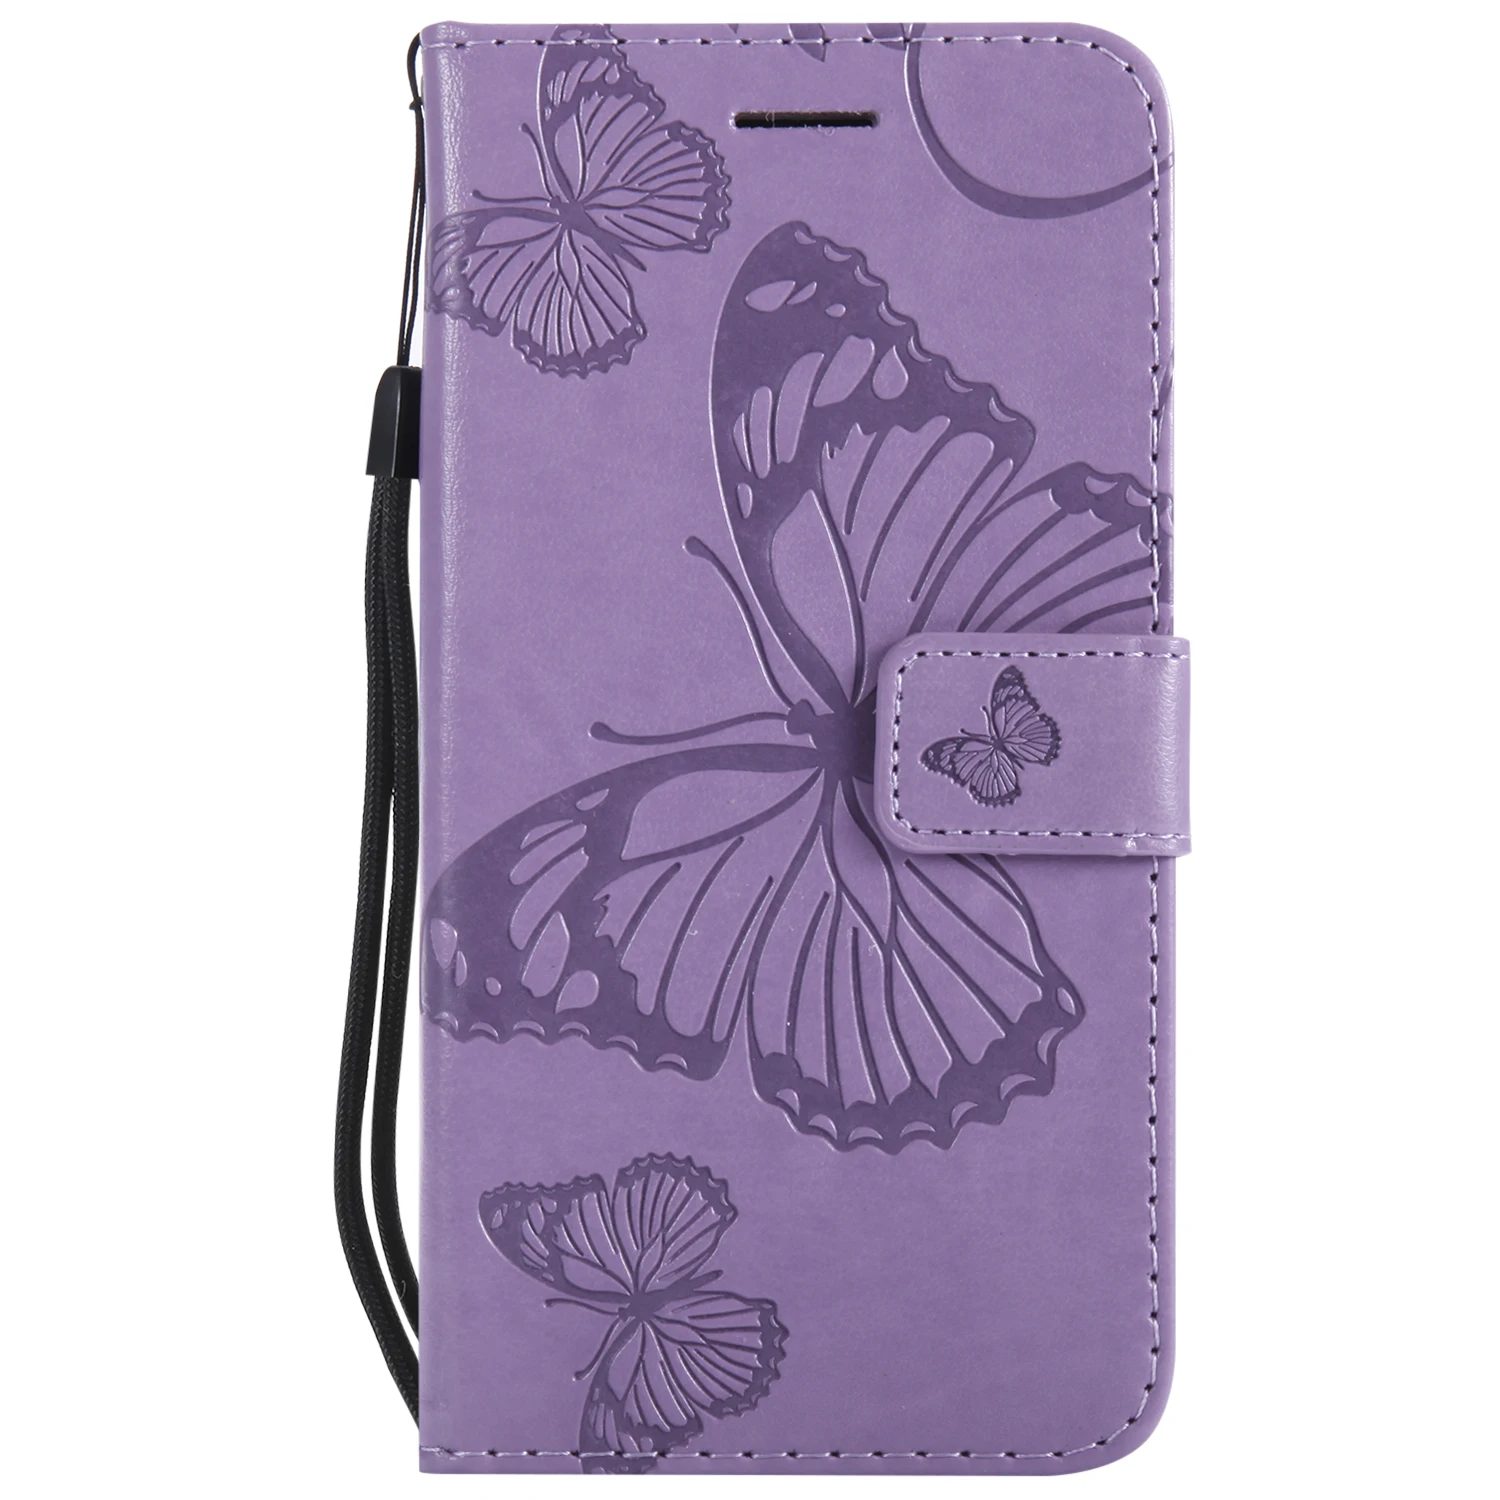 Butterfly For Samsung Galaxy A3 A5 2017 A310 A510 case Book Style Wallet Flip Leather silicone back capa cover fundas phone bag | Мобильные